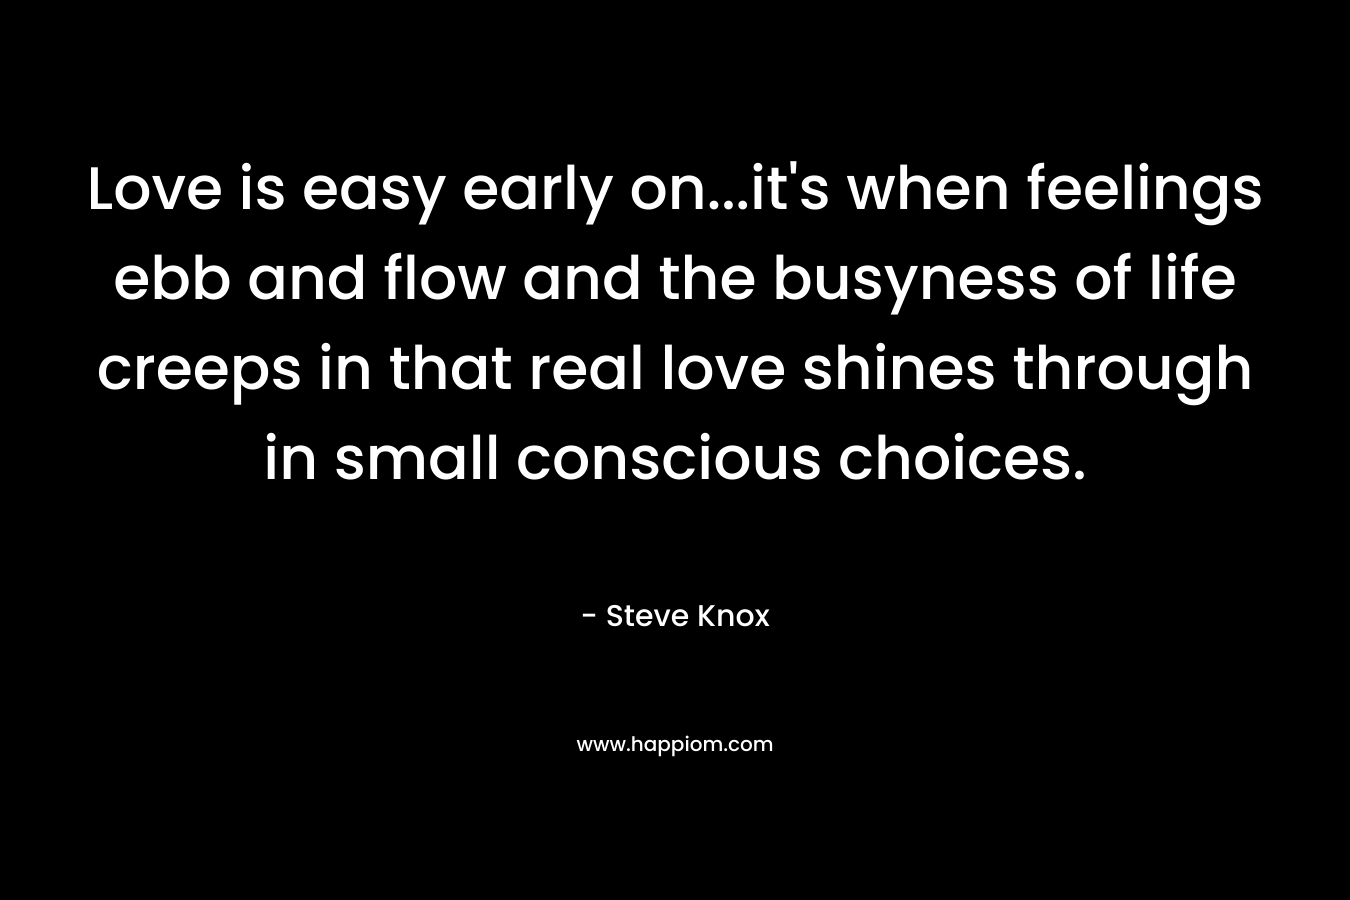 Love is easy early on…it’s when feelings ebb and flow and the busyness of life creeps in that real love shines through in small conscious choices. – Steve Knox